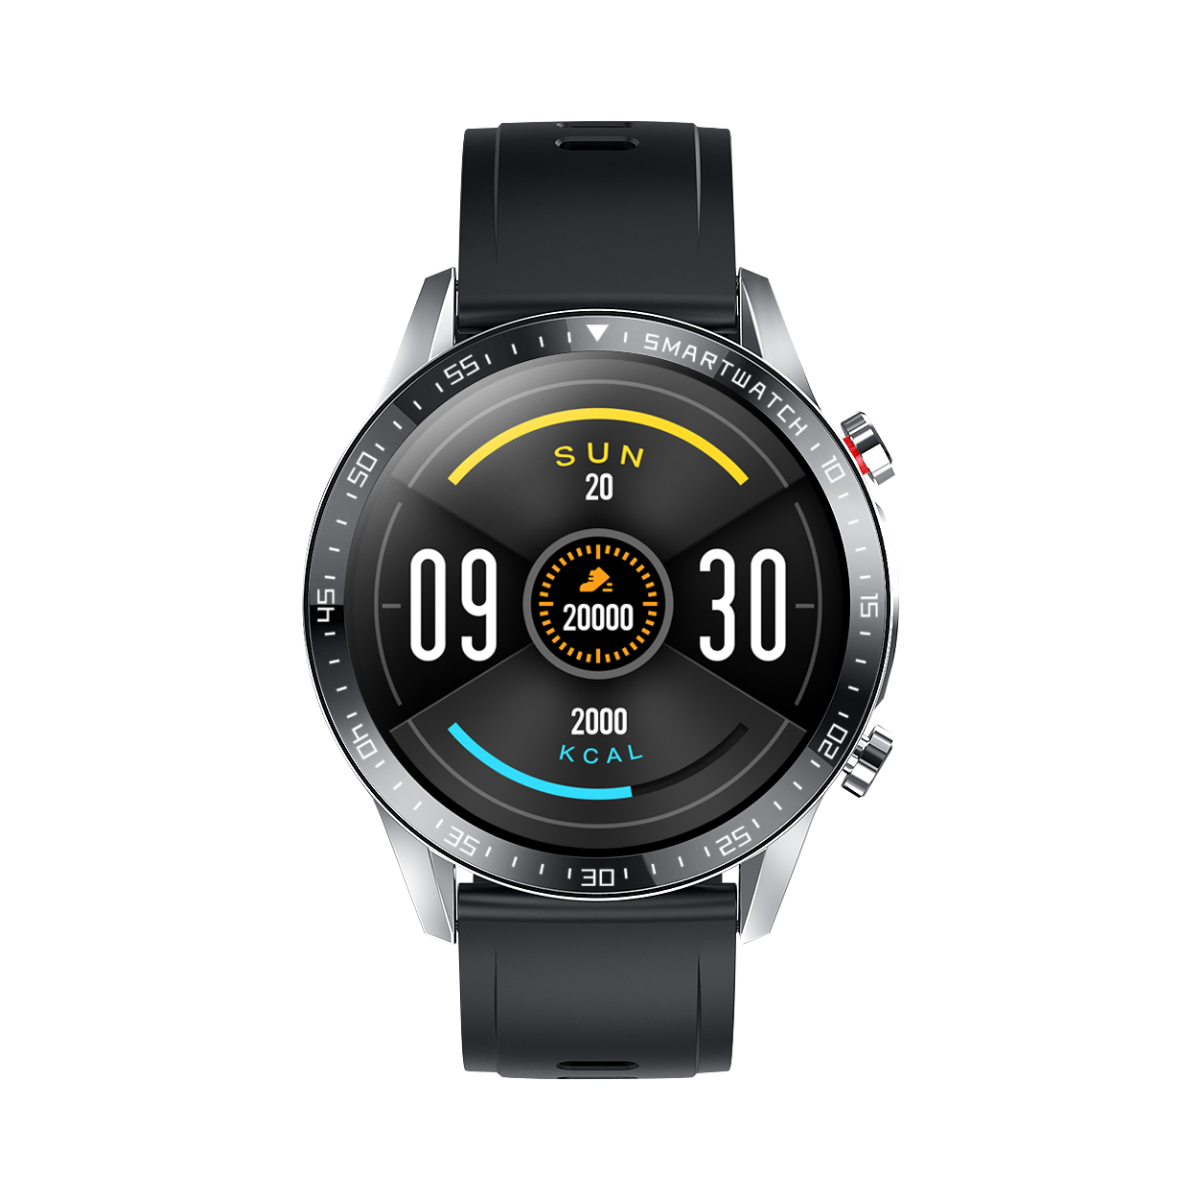 watch face of yolo fortuner in black